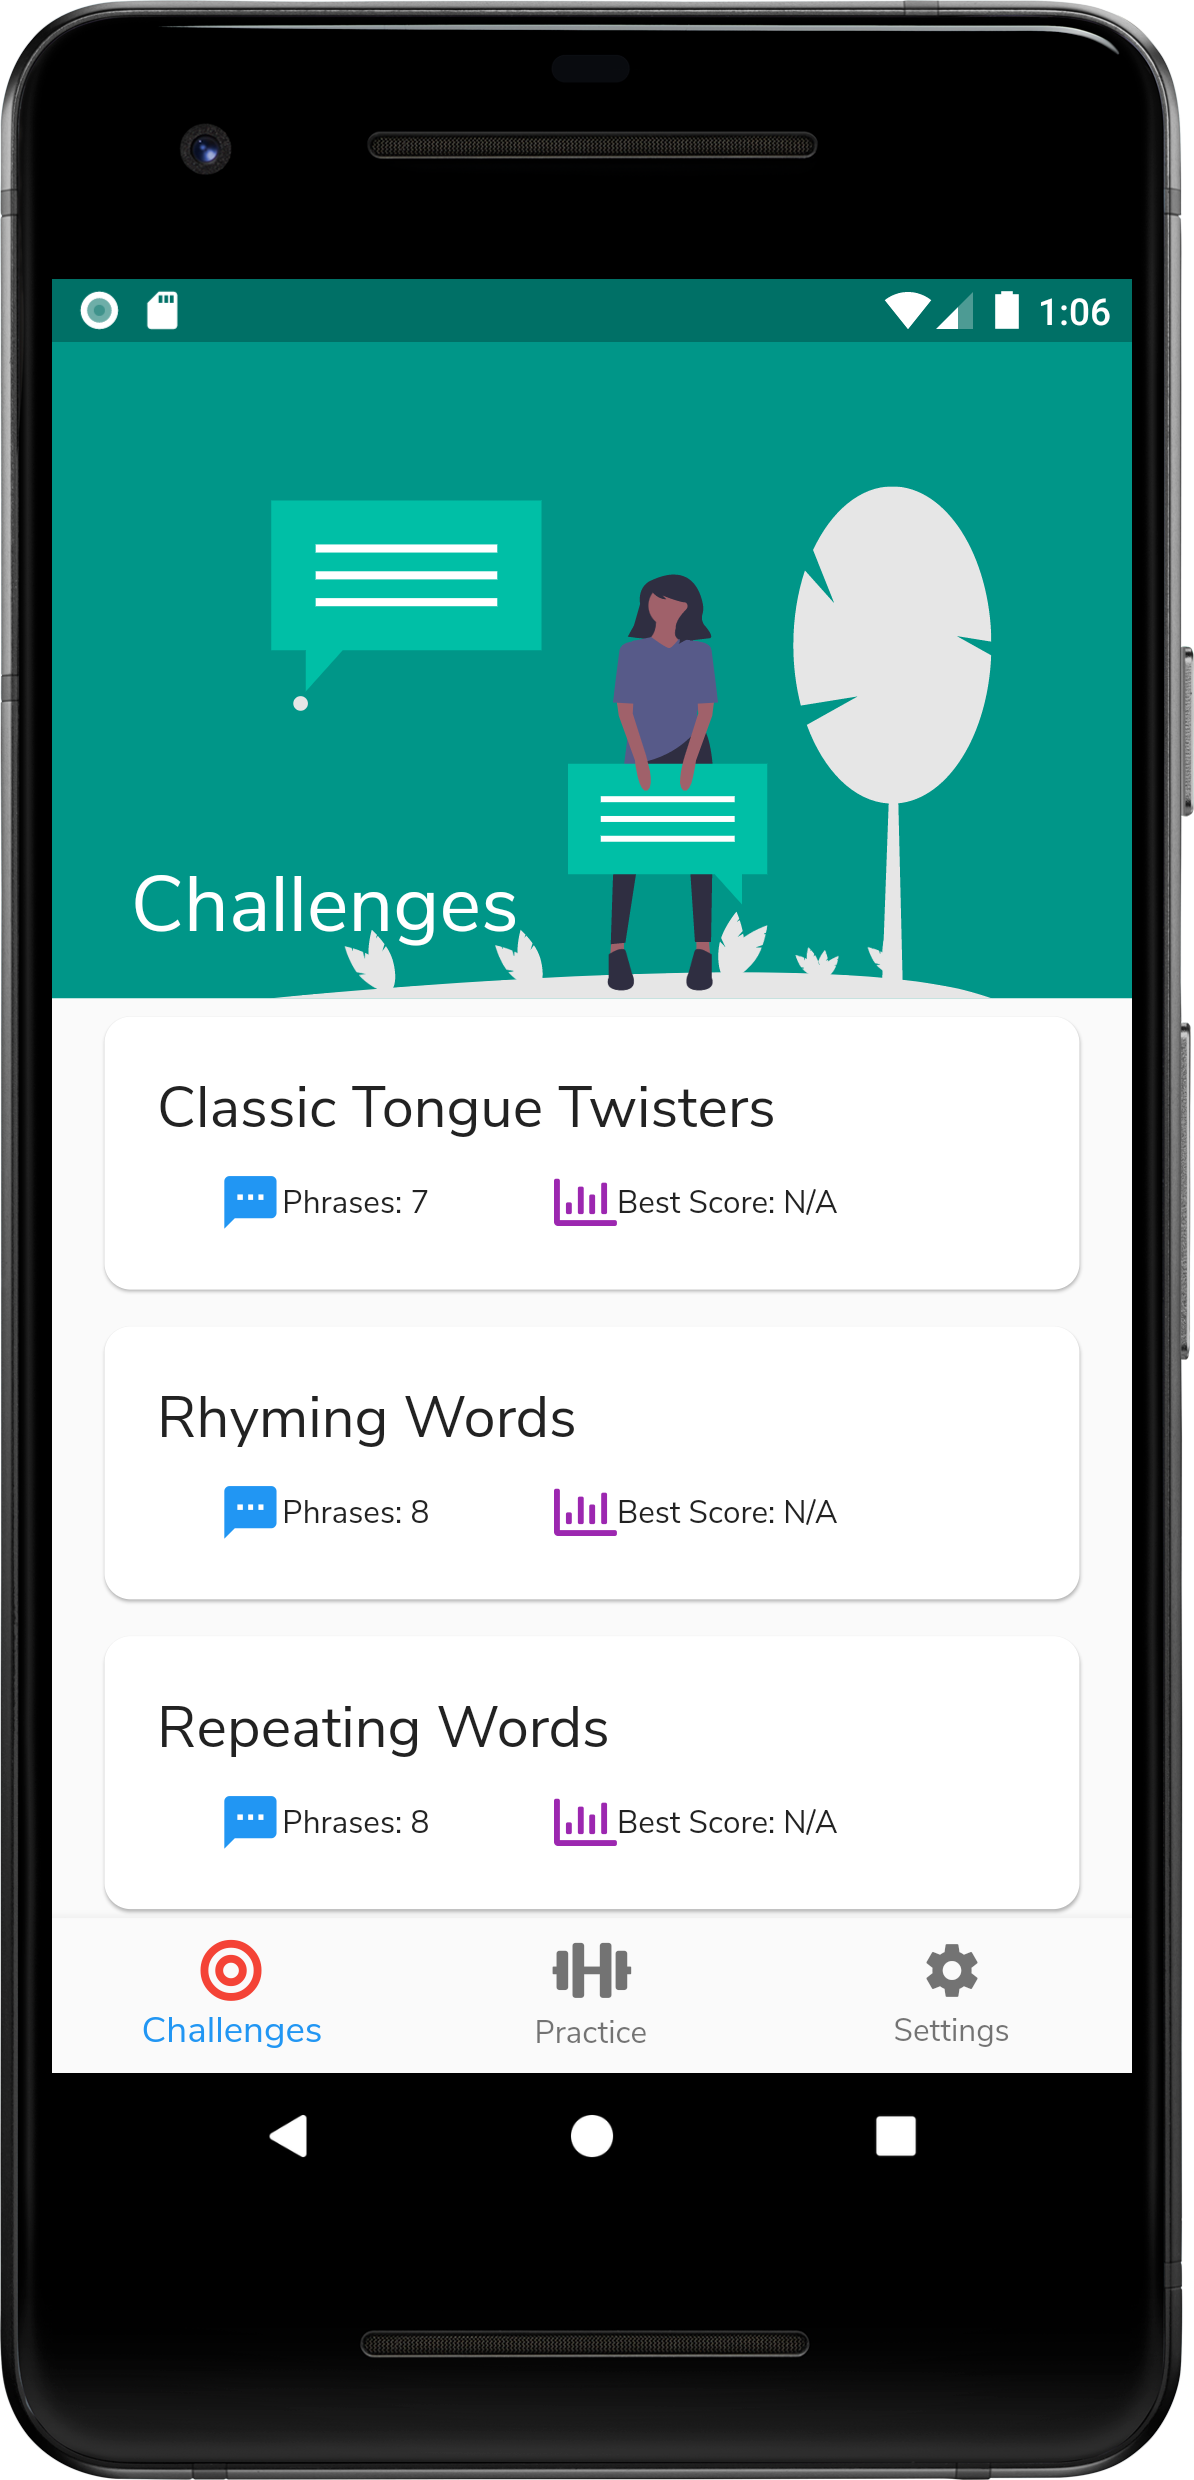 Twistify – An App with Tongue Twisters!